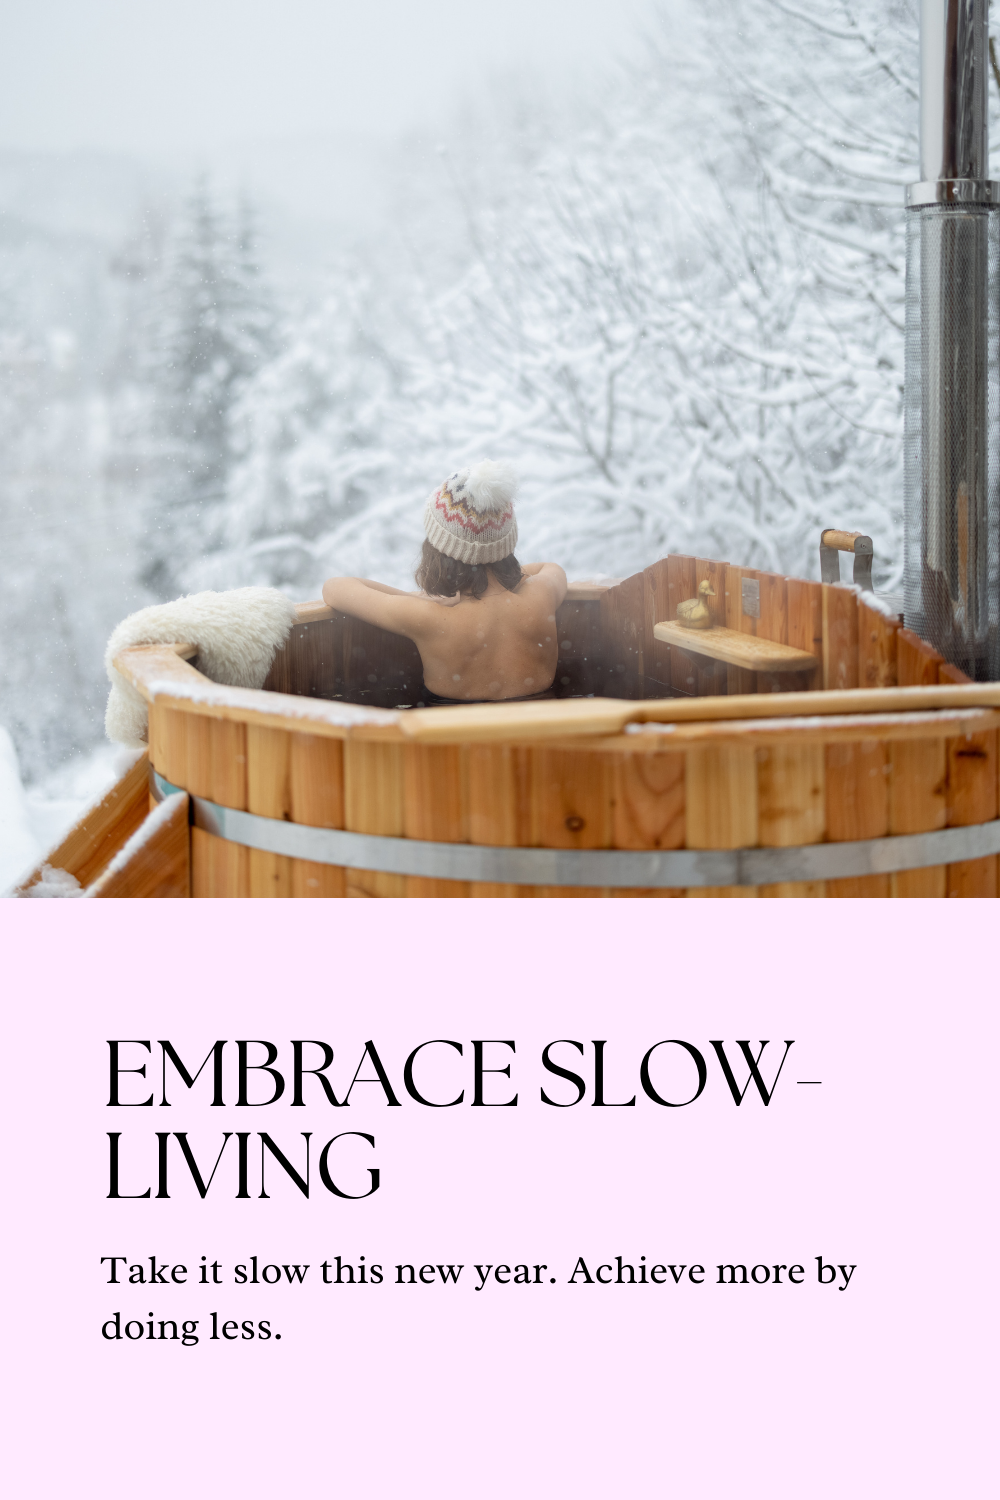 Embracing Slow Living for a Cozy New Year